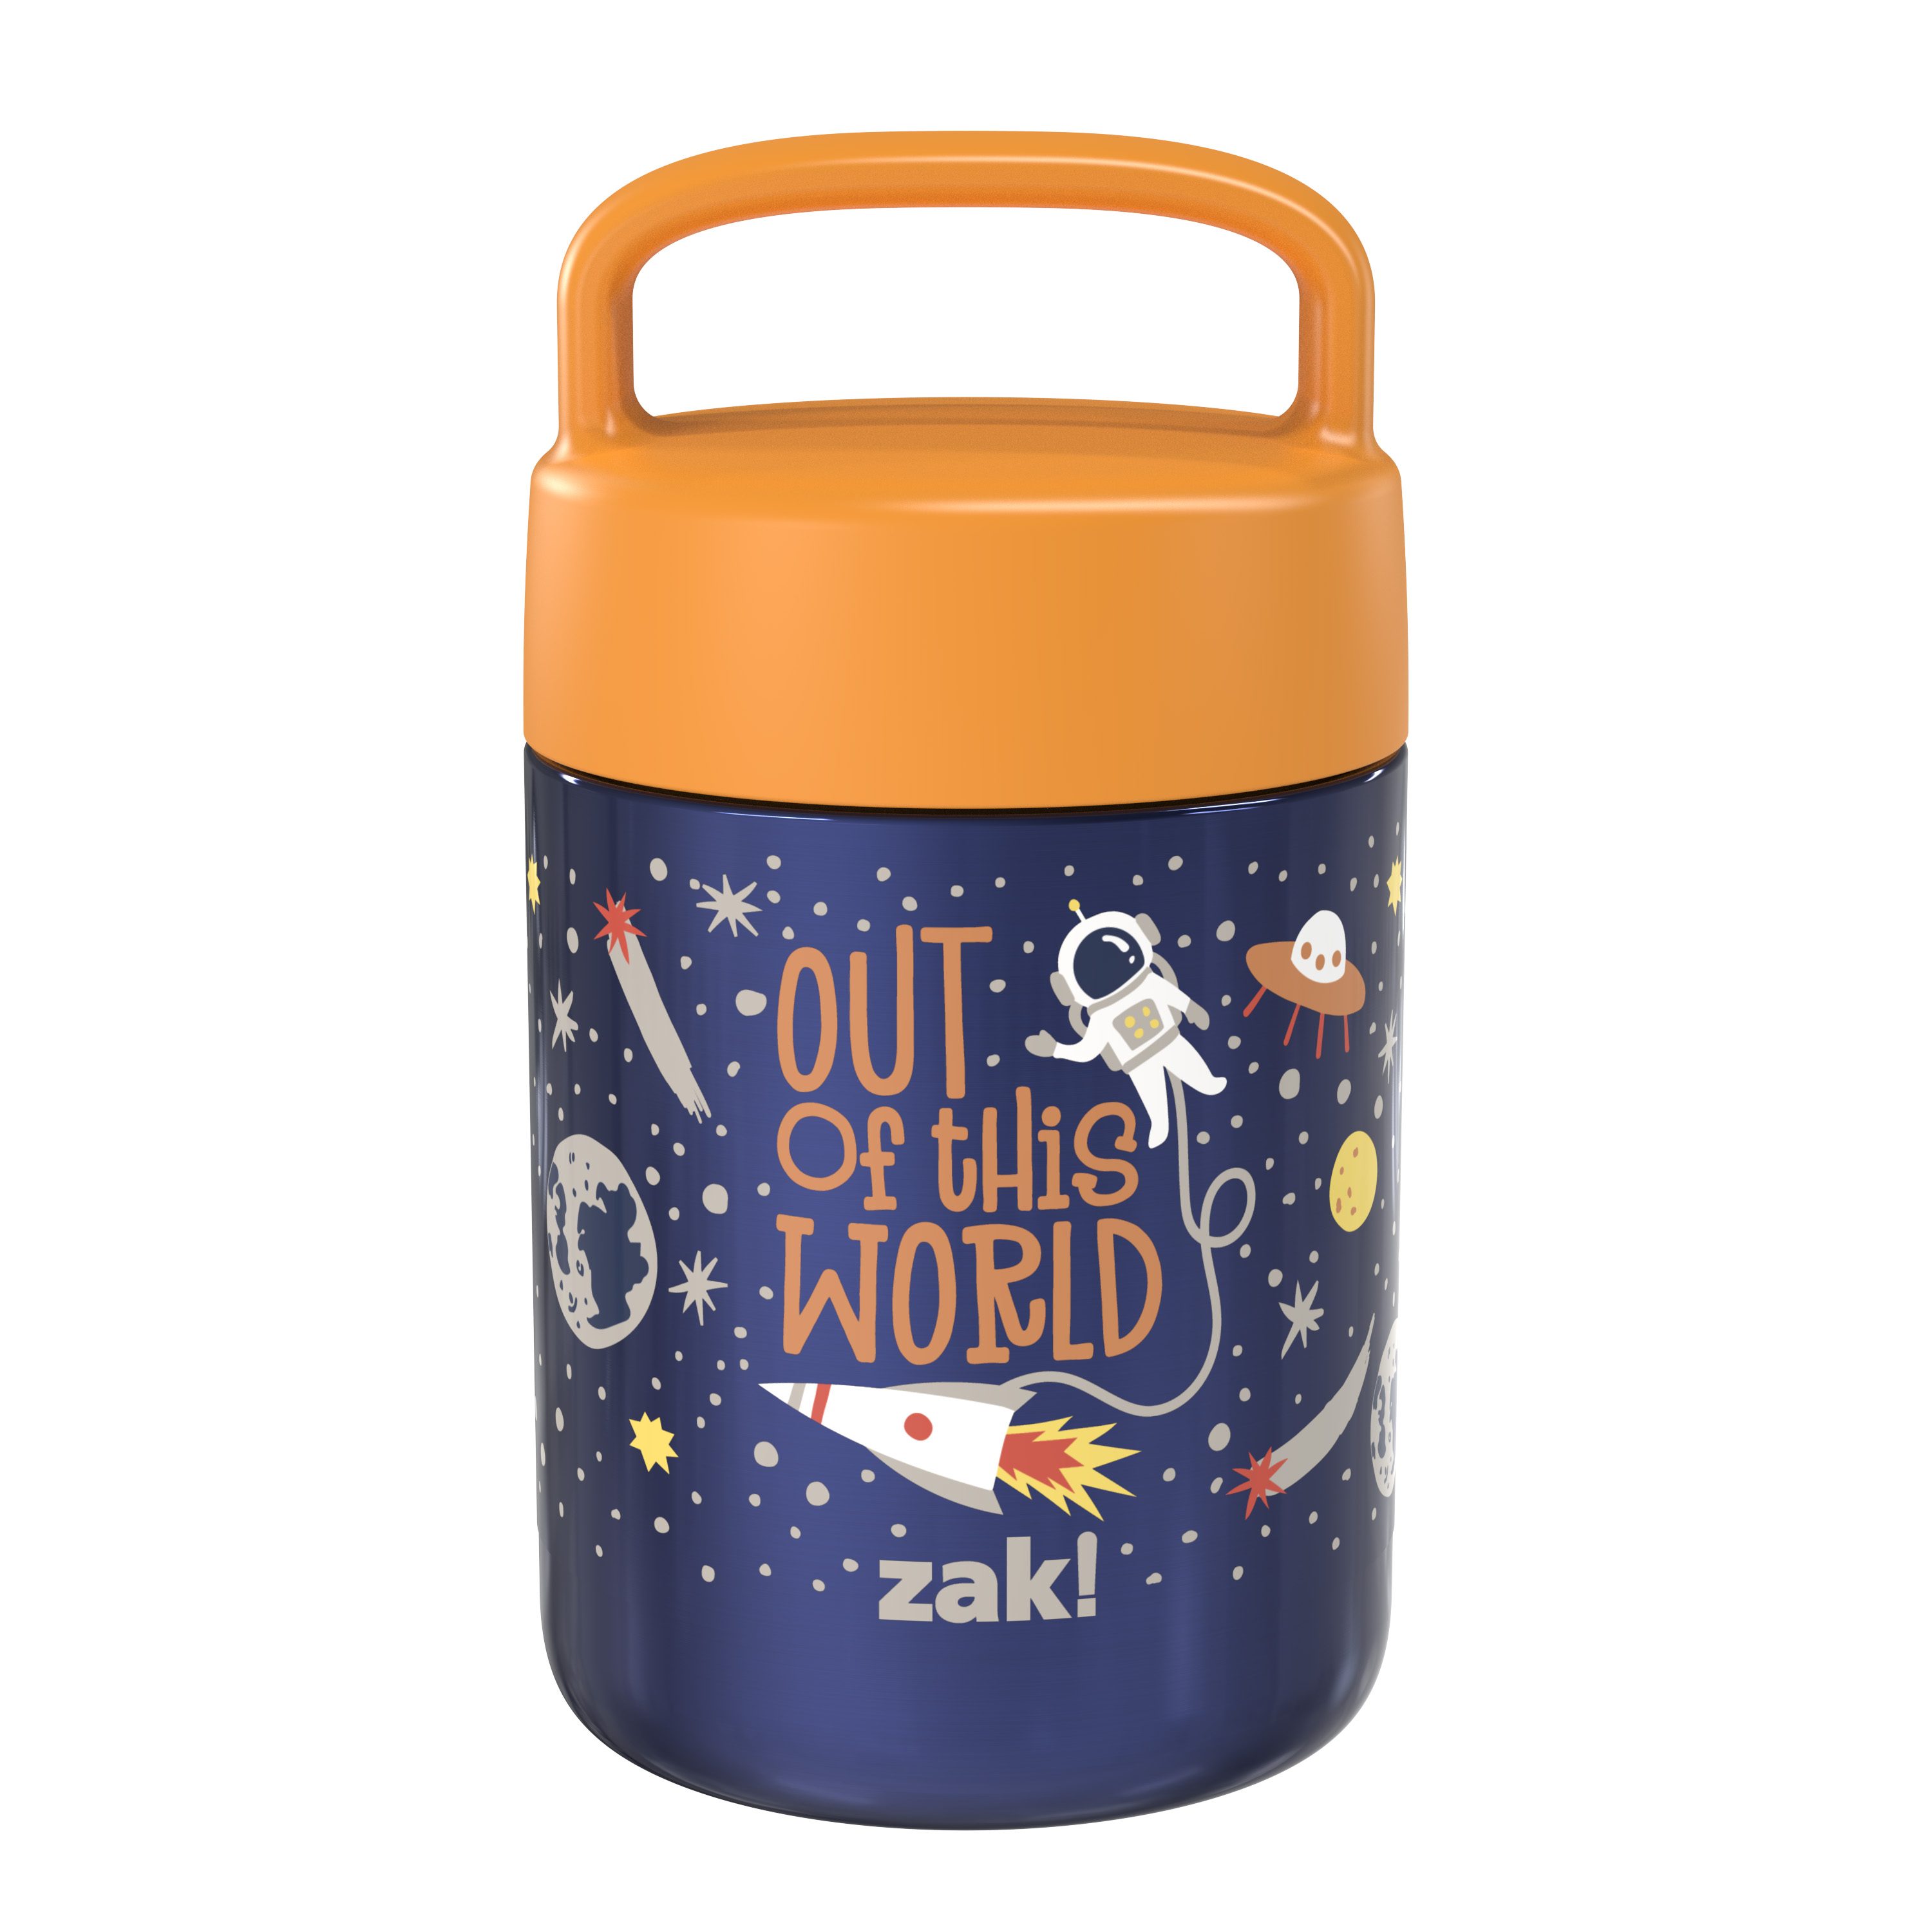 Zak Lunch! Reusable Vacuum Insulated Stainless Steel Food Container, Outer Space slideshow image 1